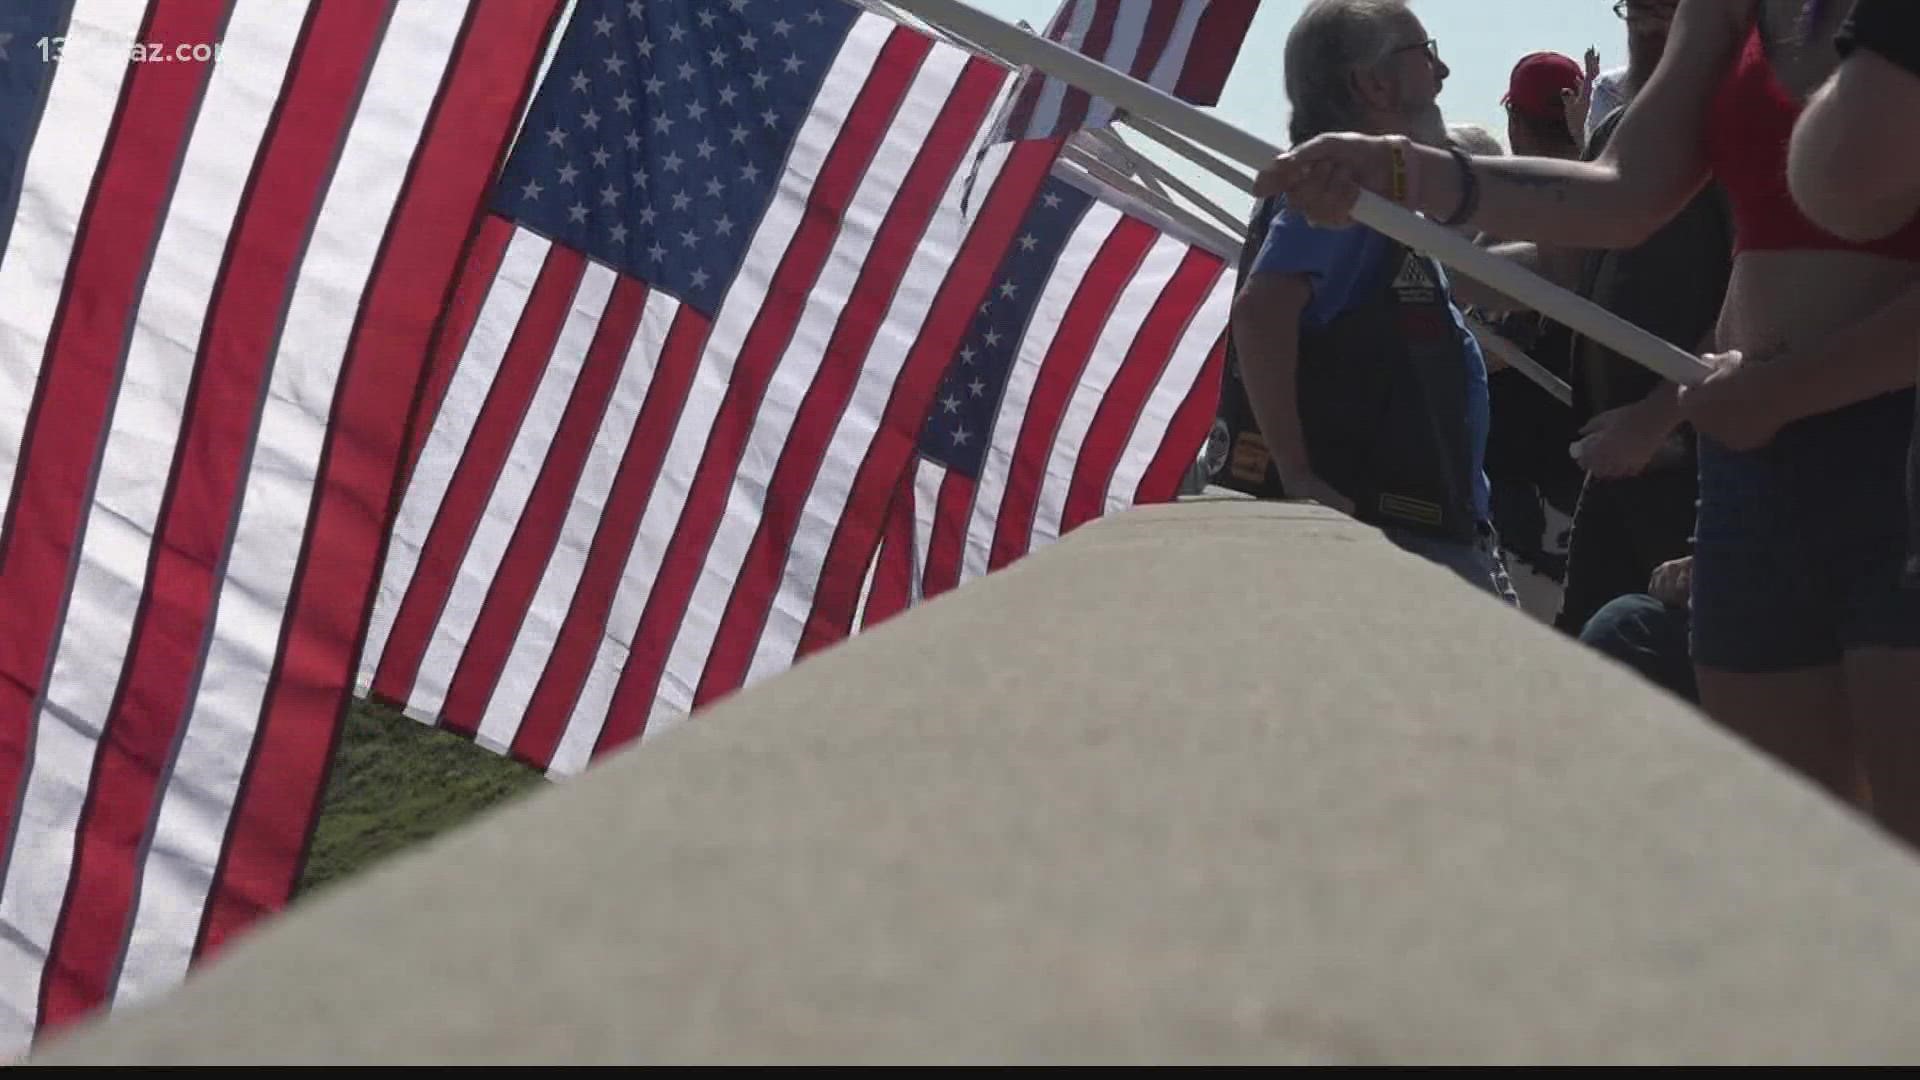 The group gathered atop the Russell Parkway bridge and waved several American flags in support of service members.